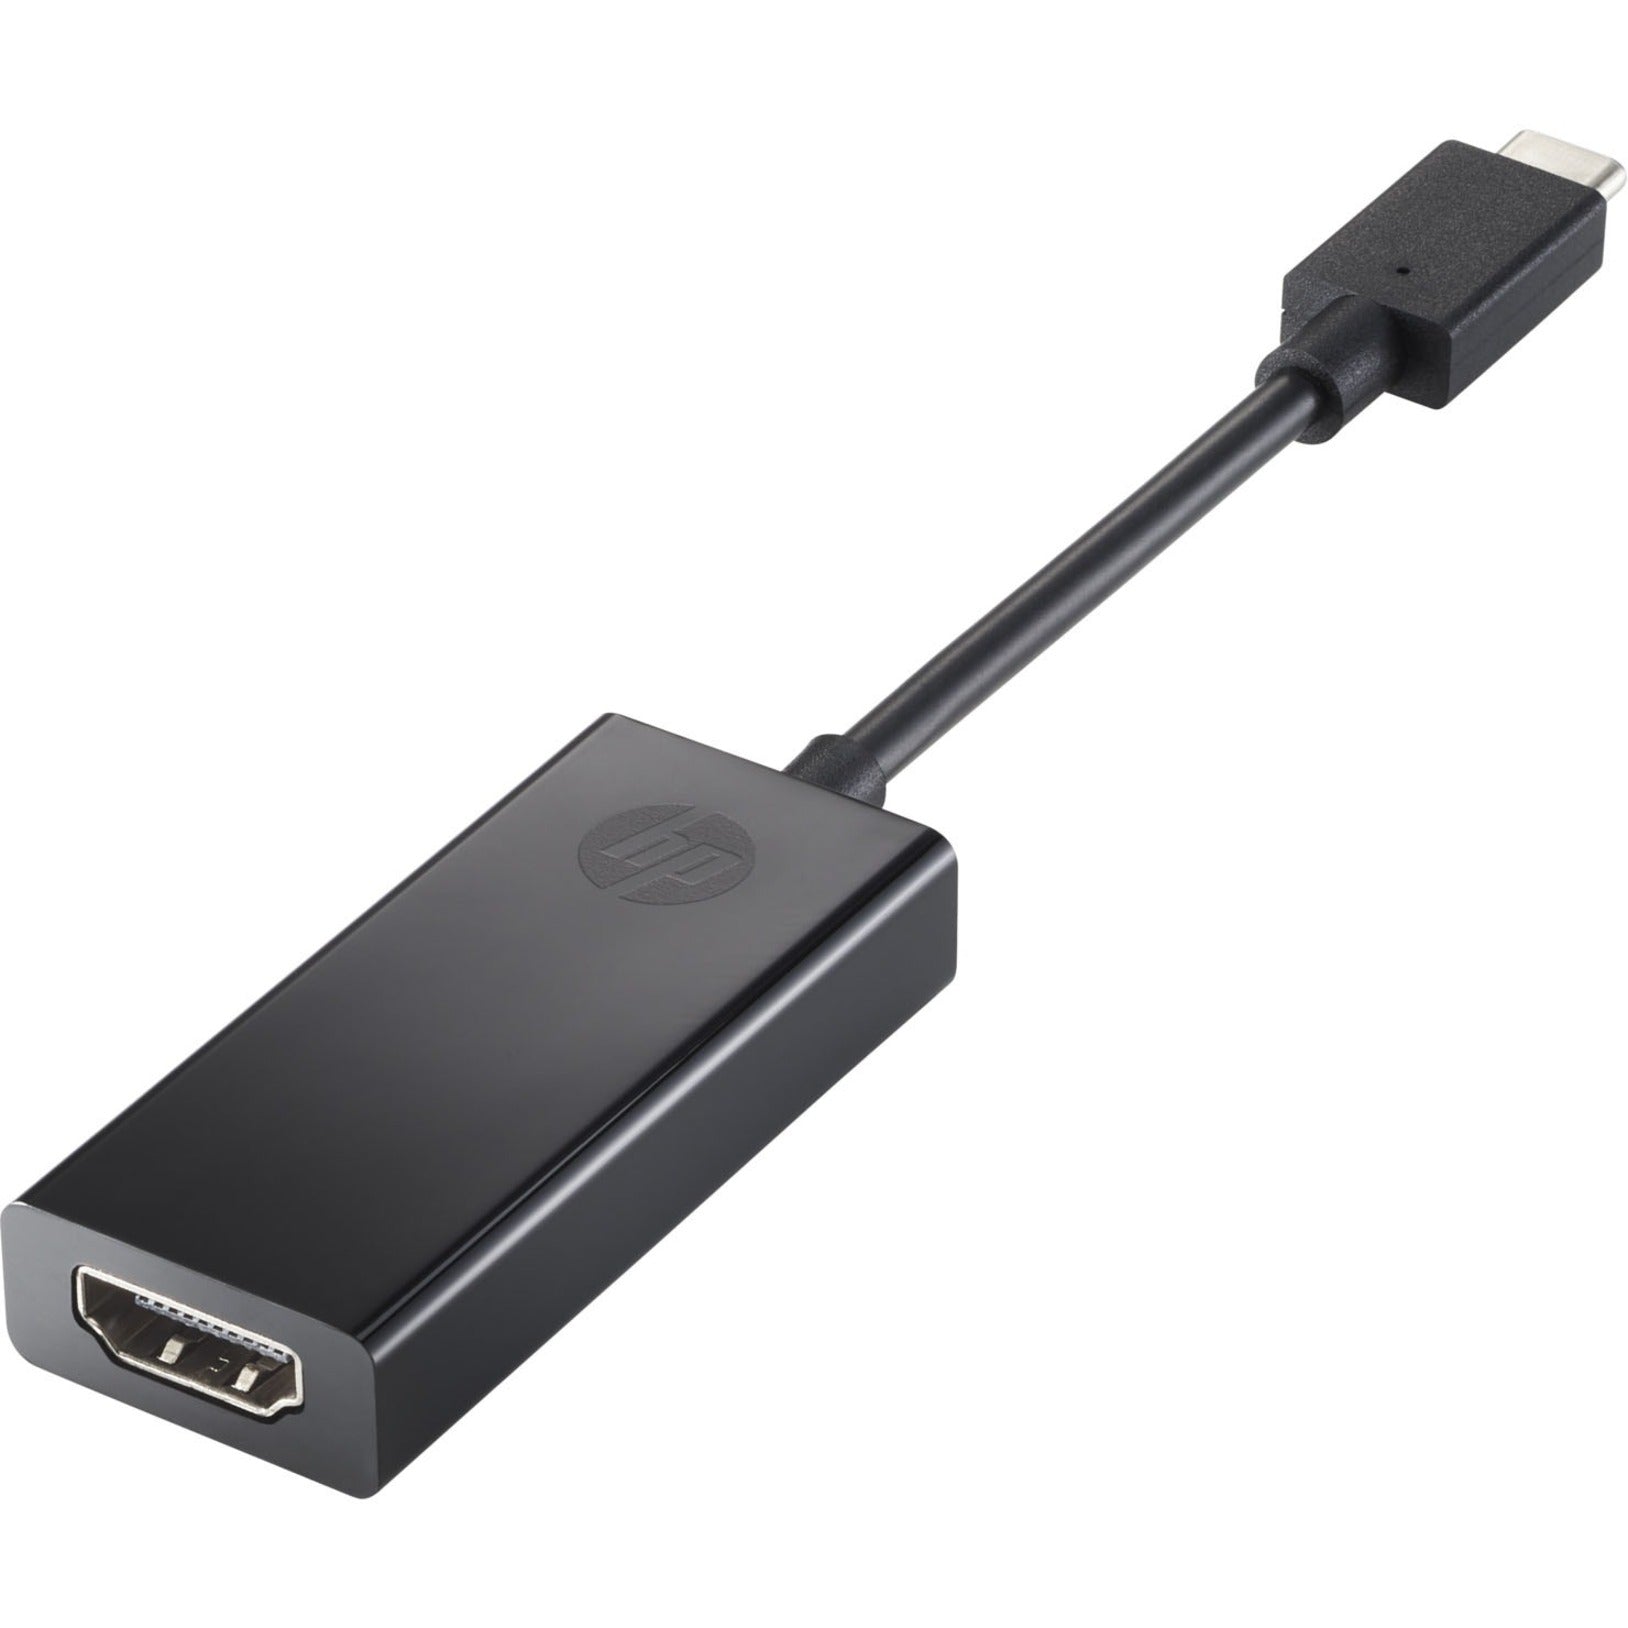 HP 1WC36UT Graphic Adapter - USB Type C, HDMI - External, PC